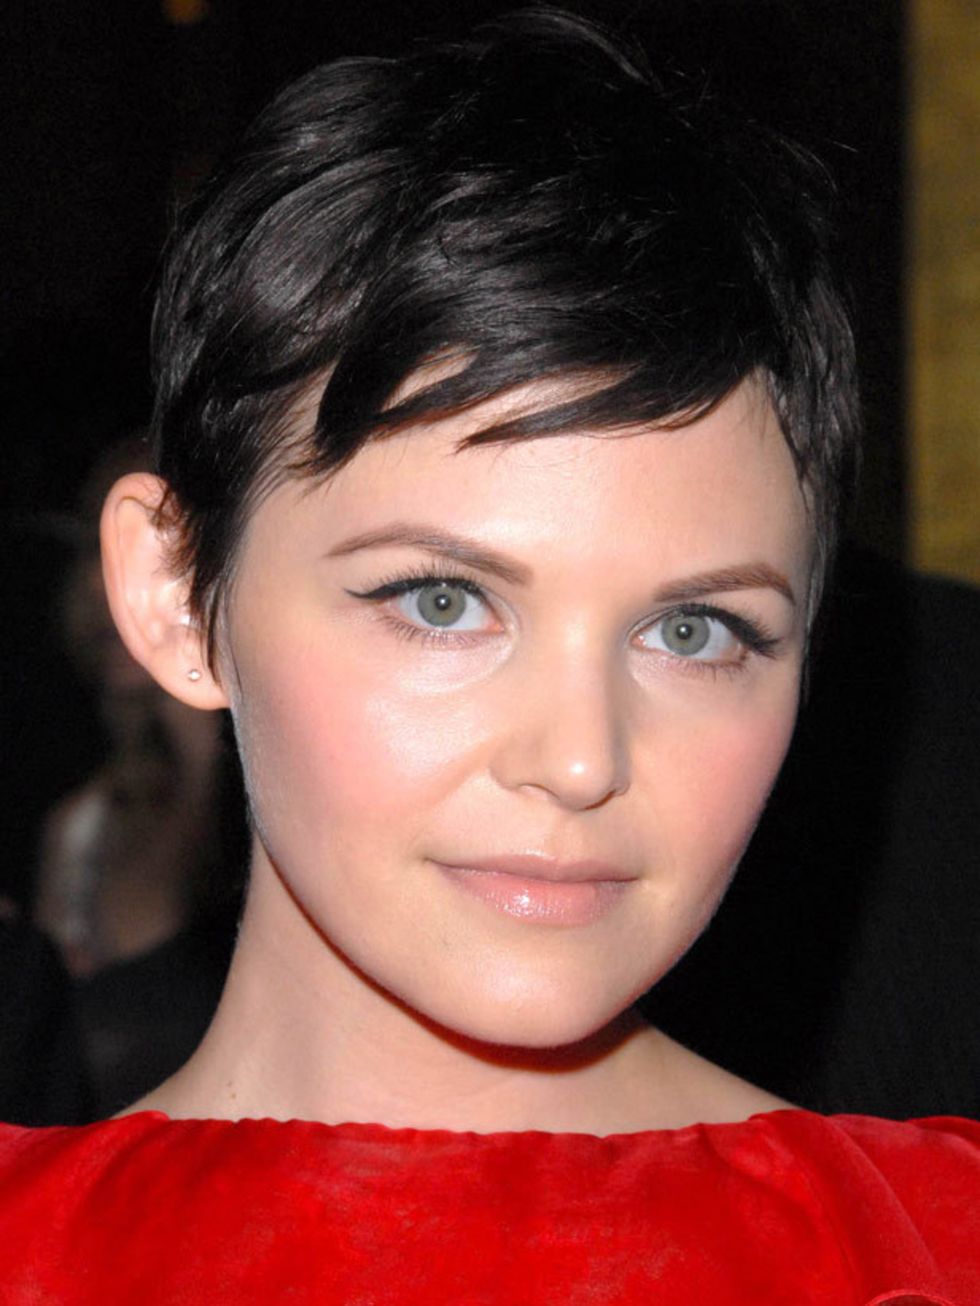 <p><a href="http://blogs.elleuk.com/beauty-notes-daily/2009/04/02/get-ginnifer-goodwin%E2%80%99s-peaches-and-cream-look/">Click here</a> to see our favourite Ginnifer beauty look...</p>